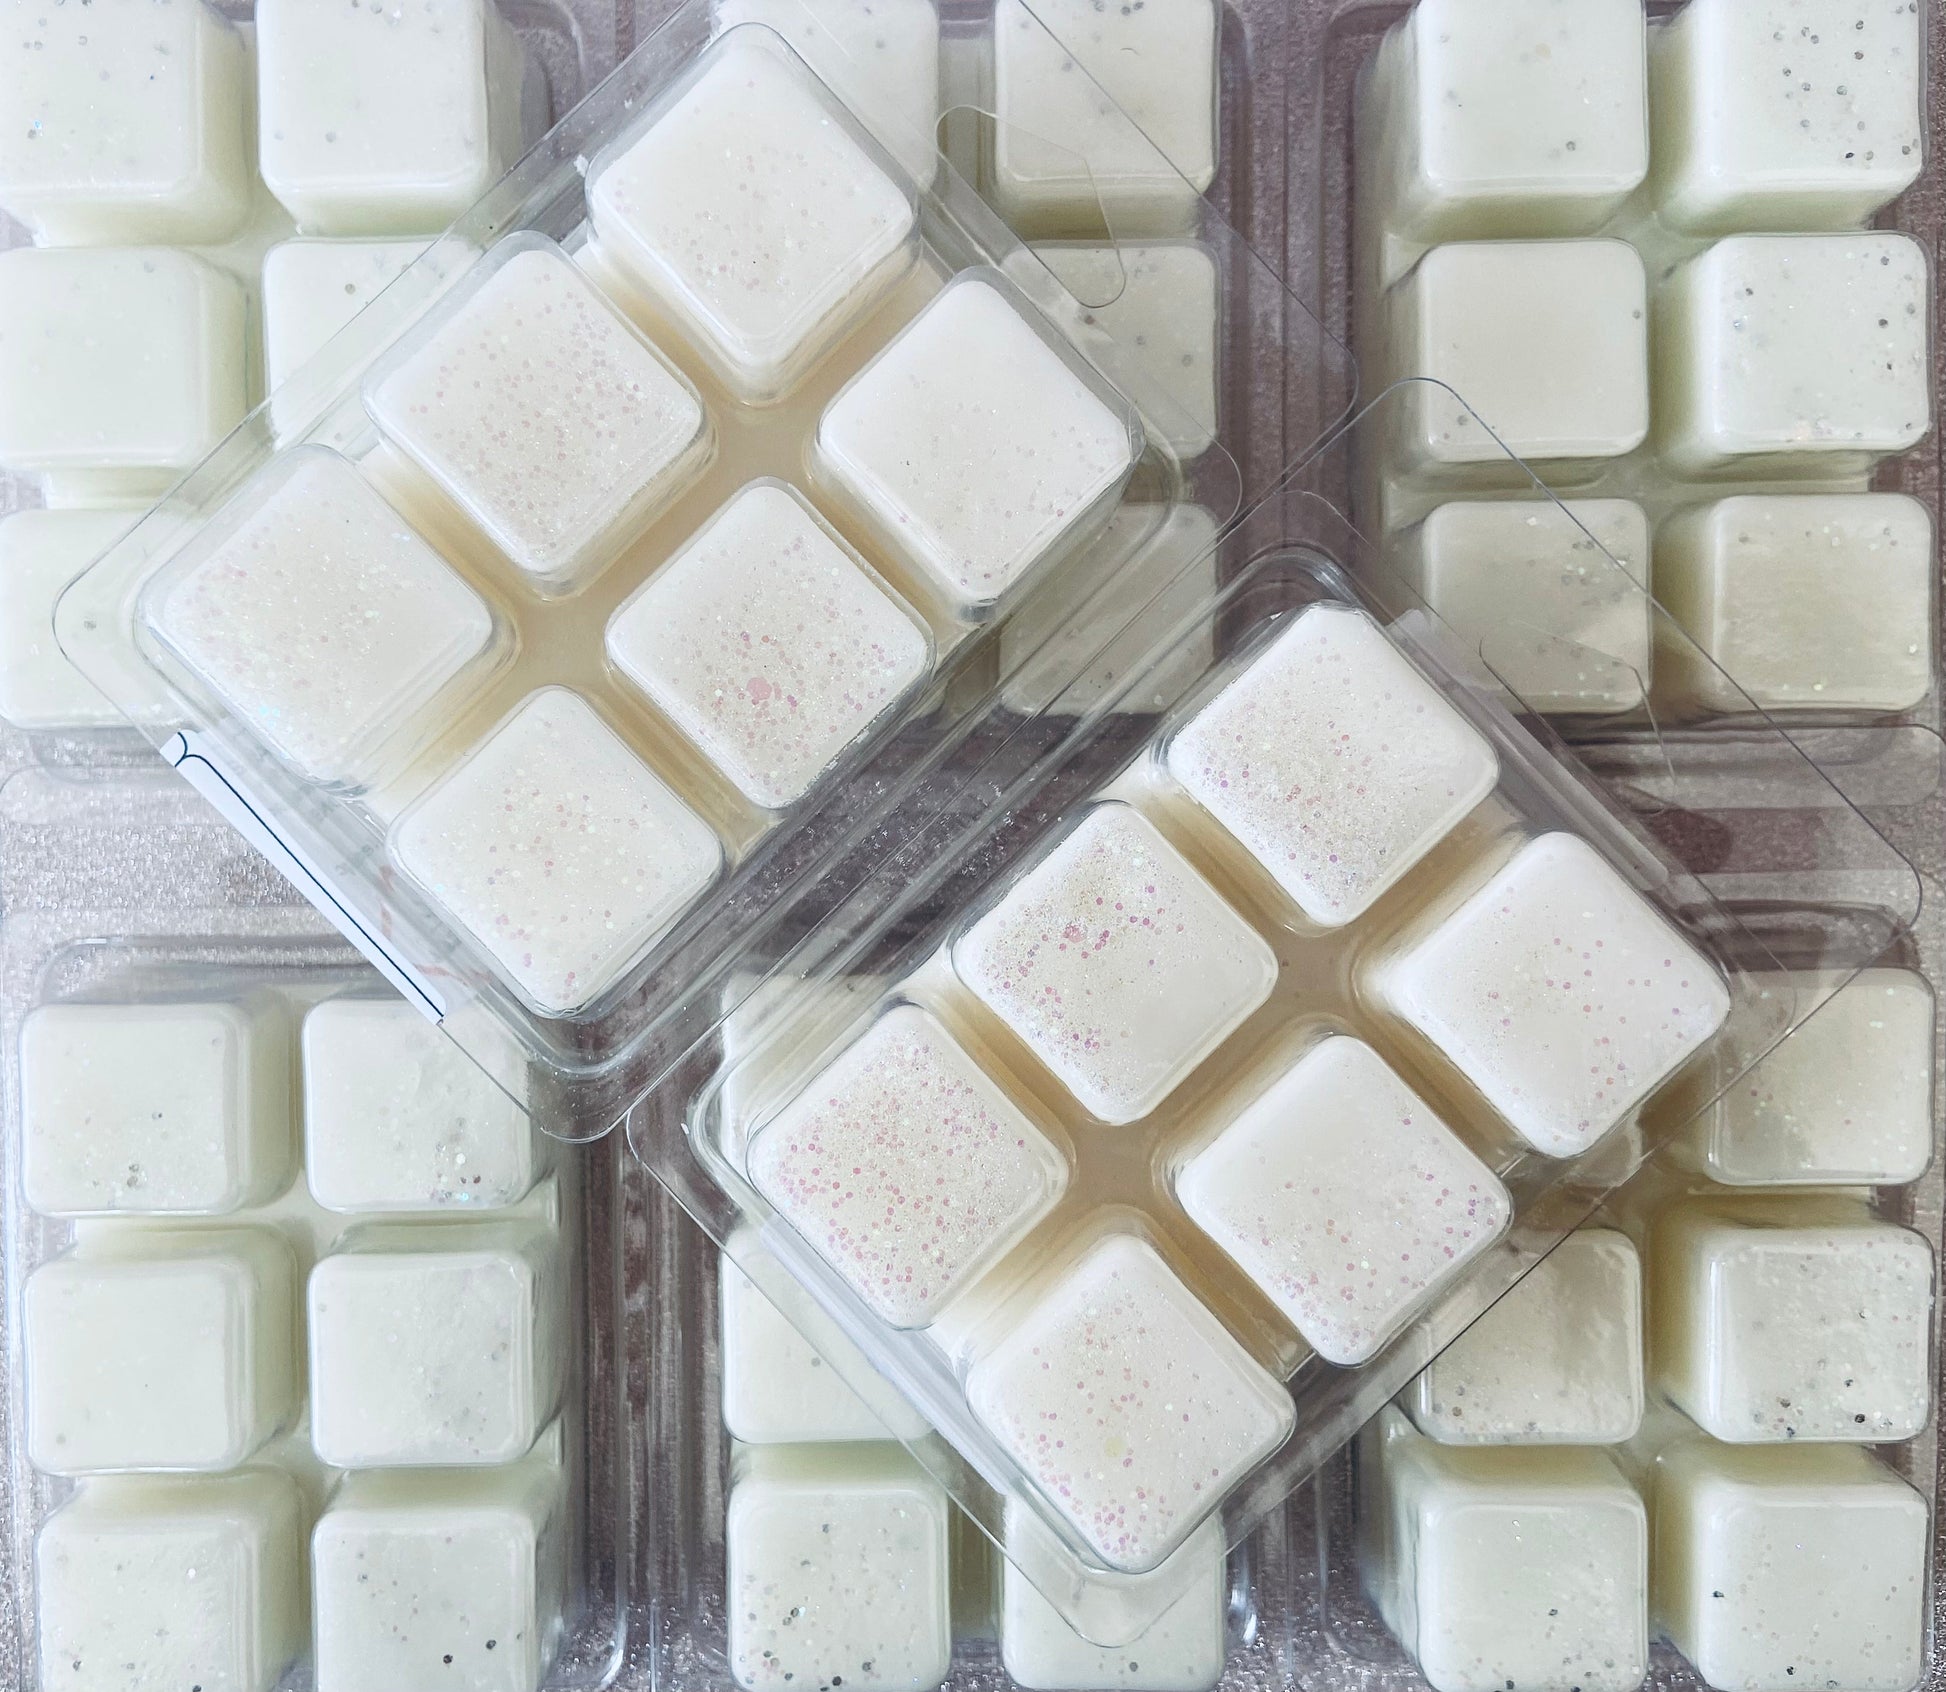 Trays of square-shaped, white Unstoppables Wax Melt candles with a sprinkling of pink speckles by The Soap Gals.